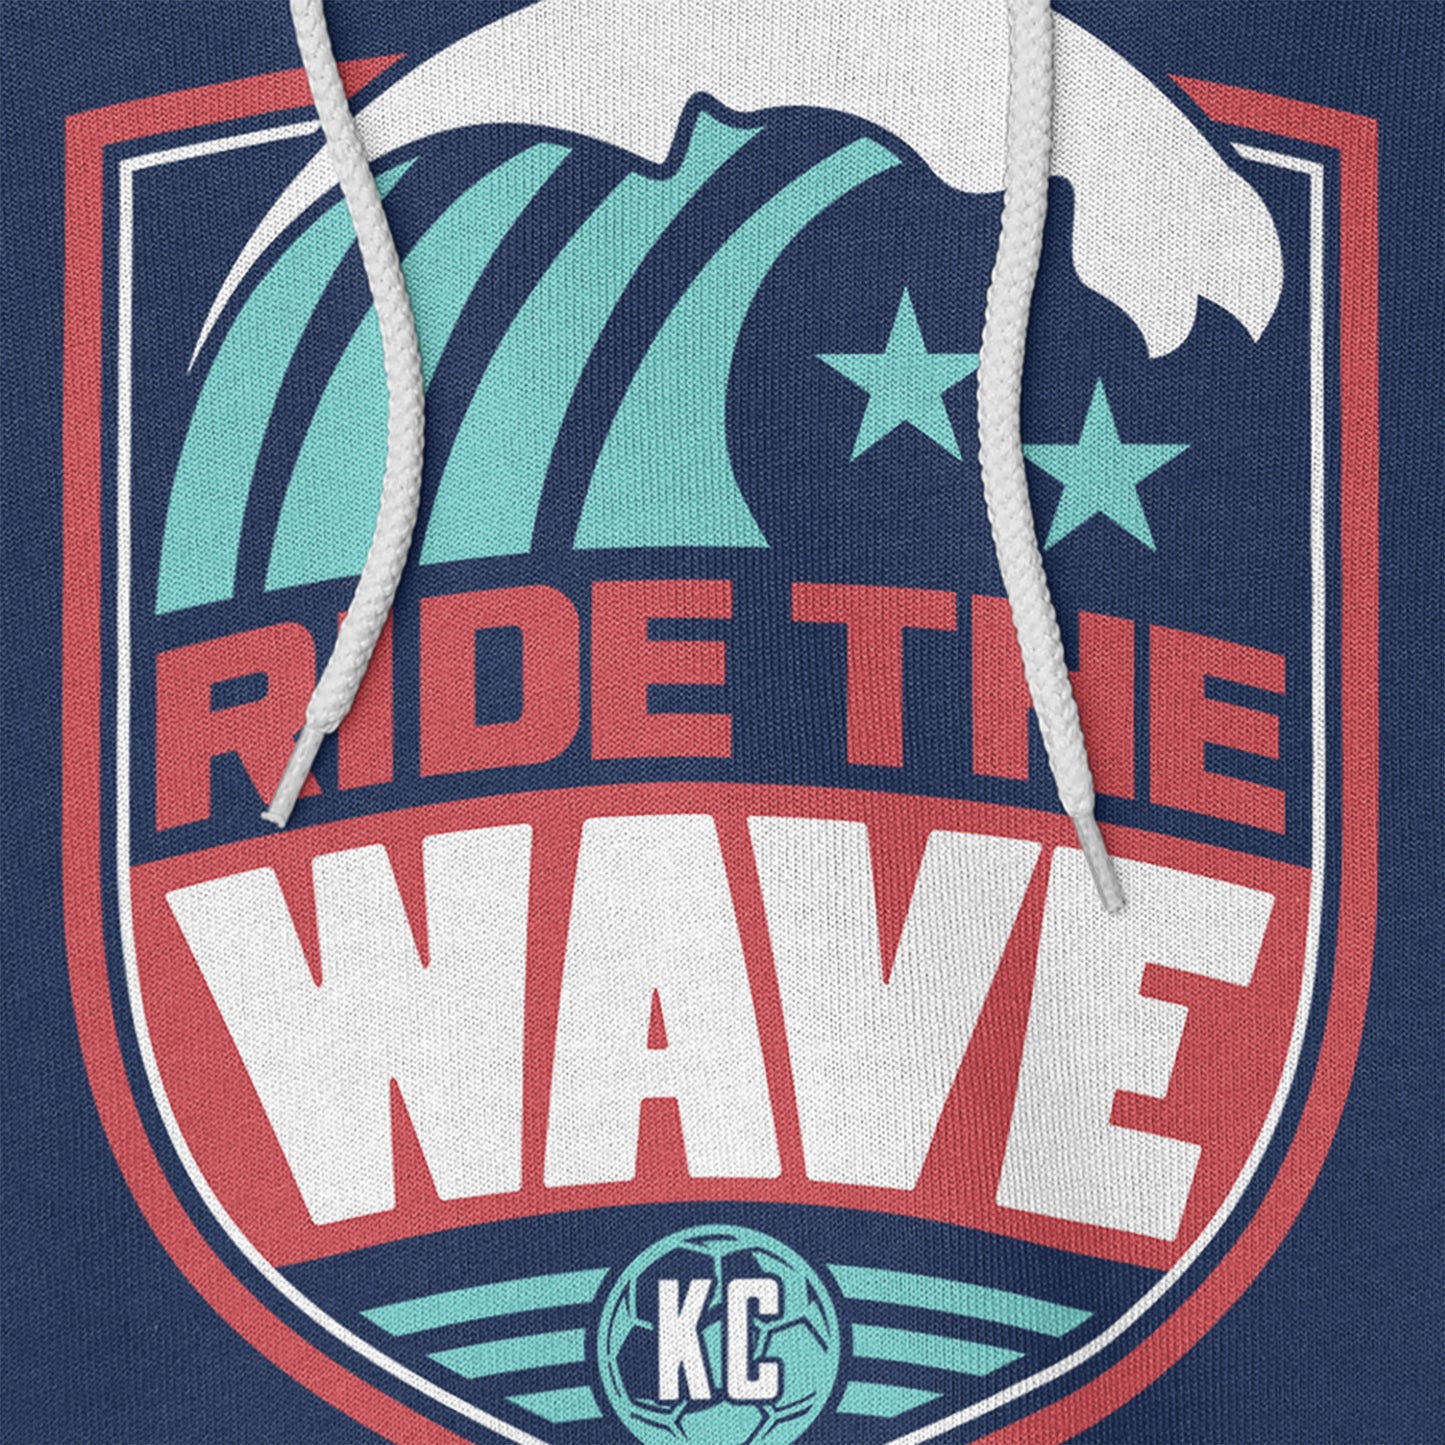 KC Swag Kansas City Current RIDE THE WAVE on navy fleece pullover hoodie closeup details of printed graphics